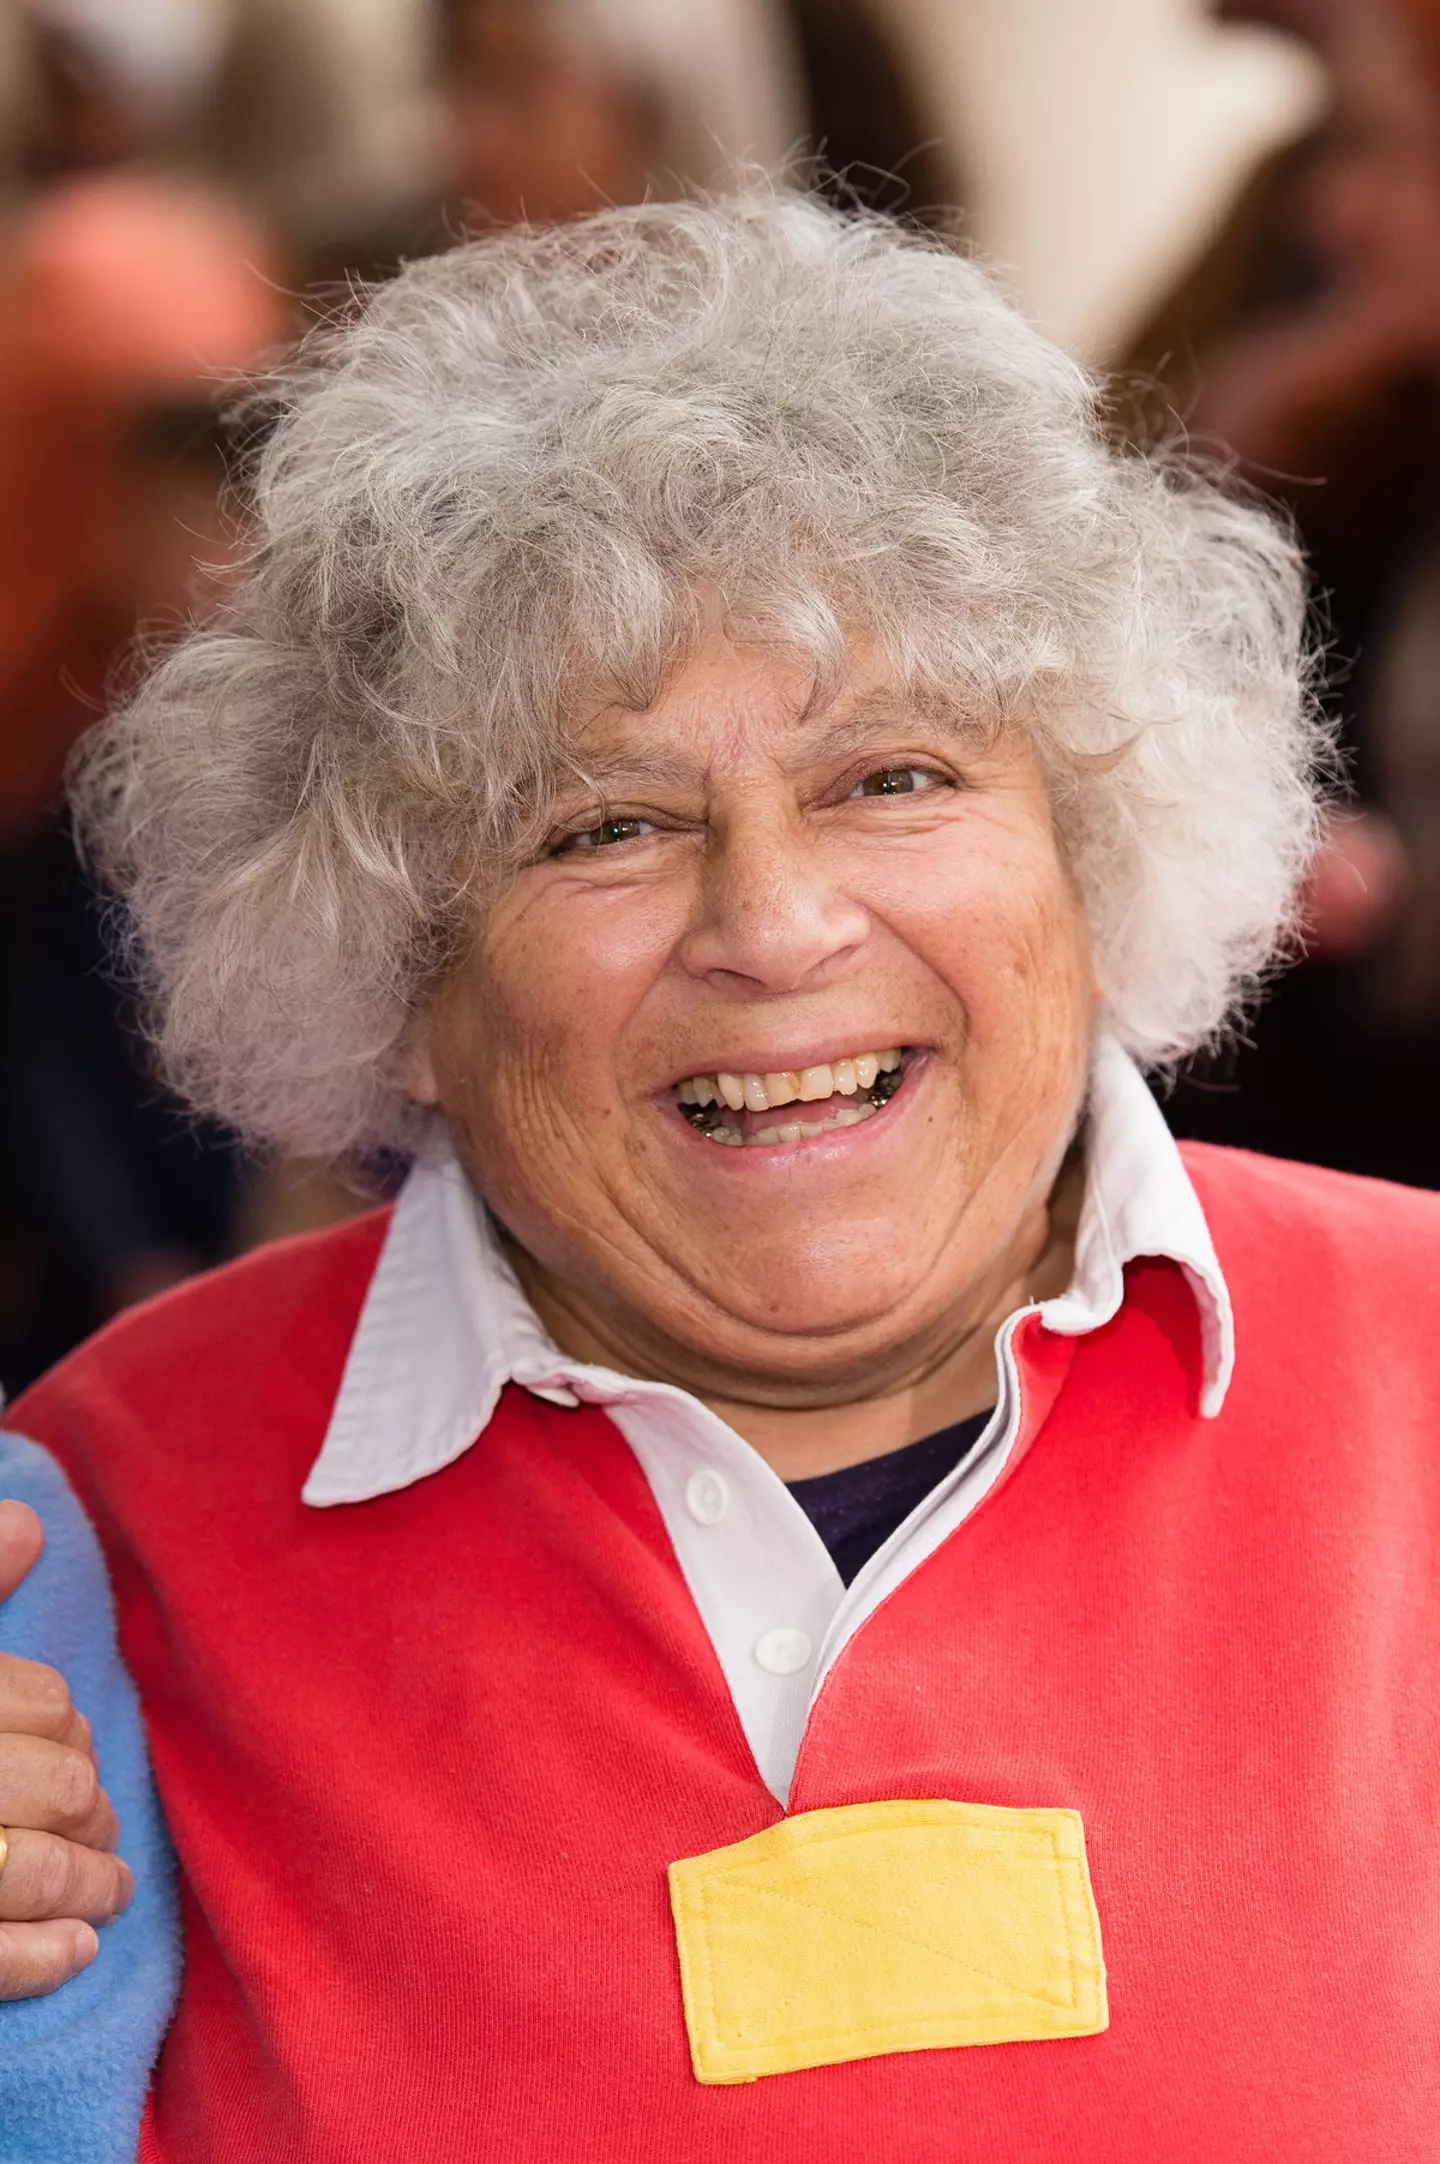 Miriam Margolyes opened up about her health struggles in a recent podcast.